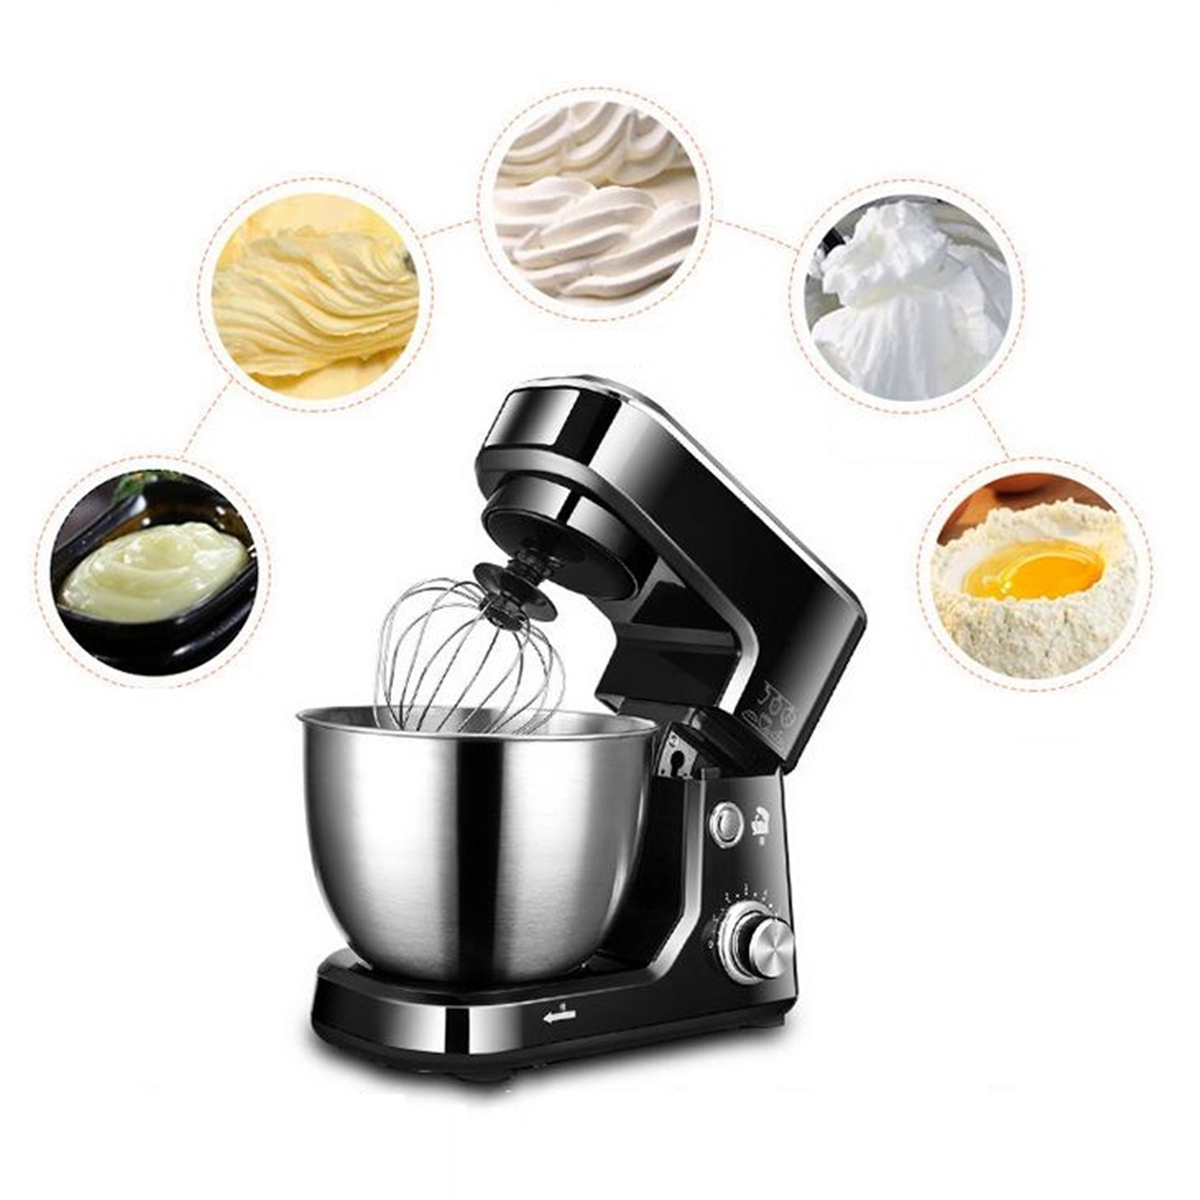 Automatic Mini Egg Beater Stand Mixer Multifunctional 4L Capacity 600W Power Motor Egg Blender 220V 50Hz Tilt Head W Bowl with handle Motor Over-Tempe 20